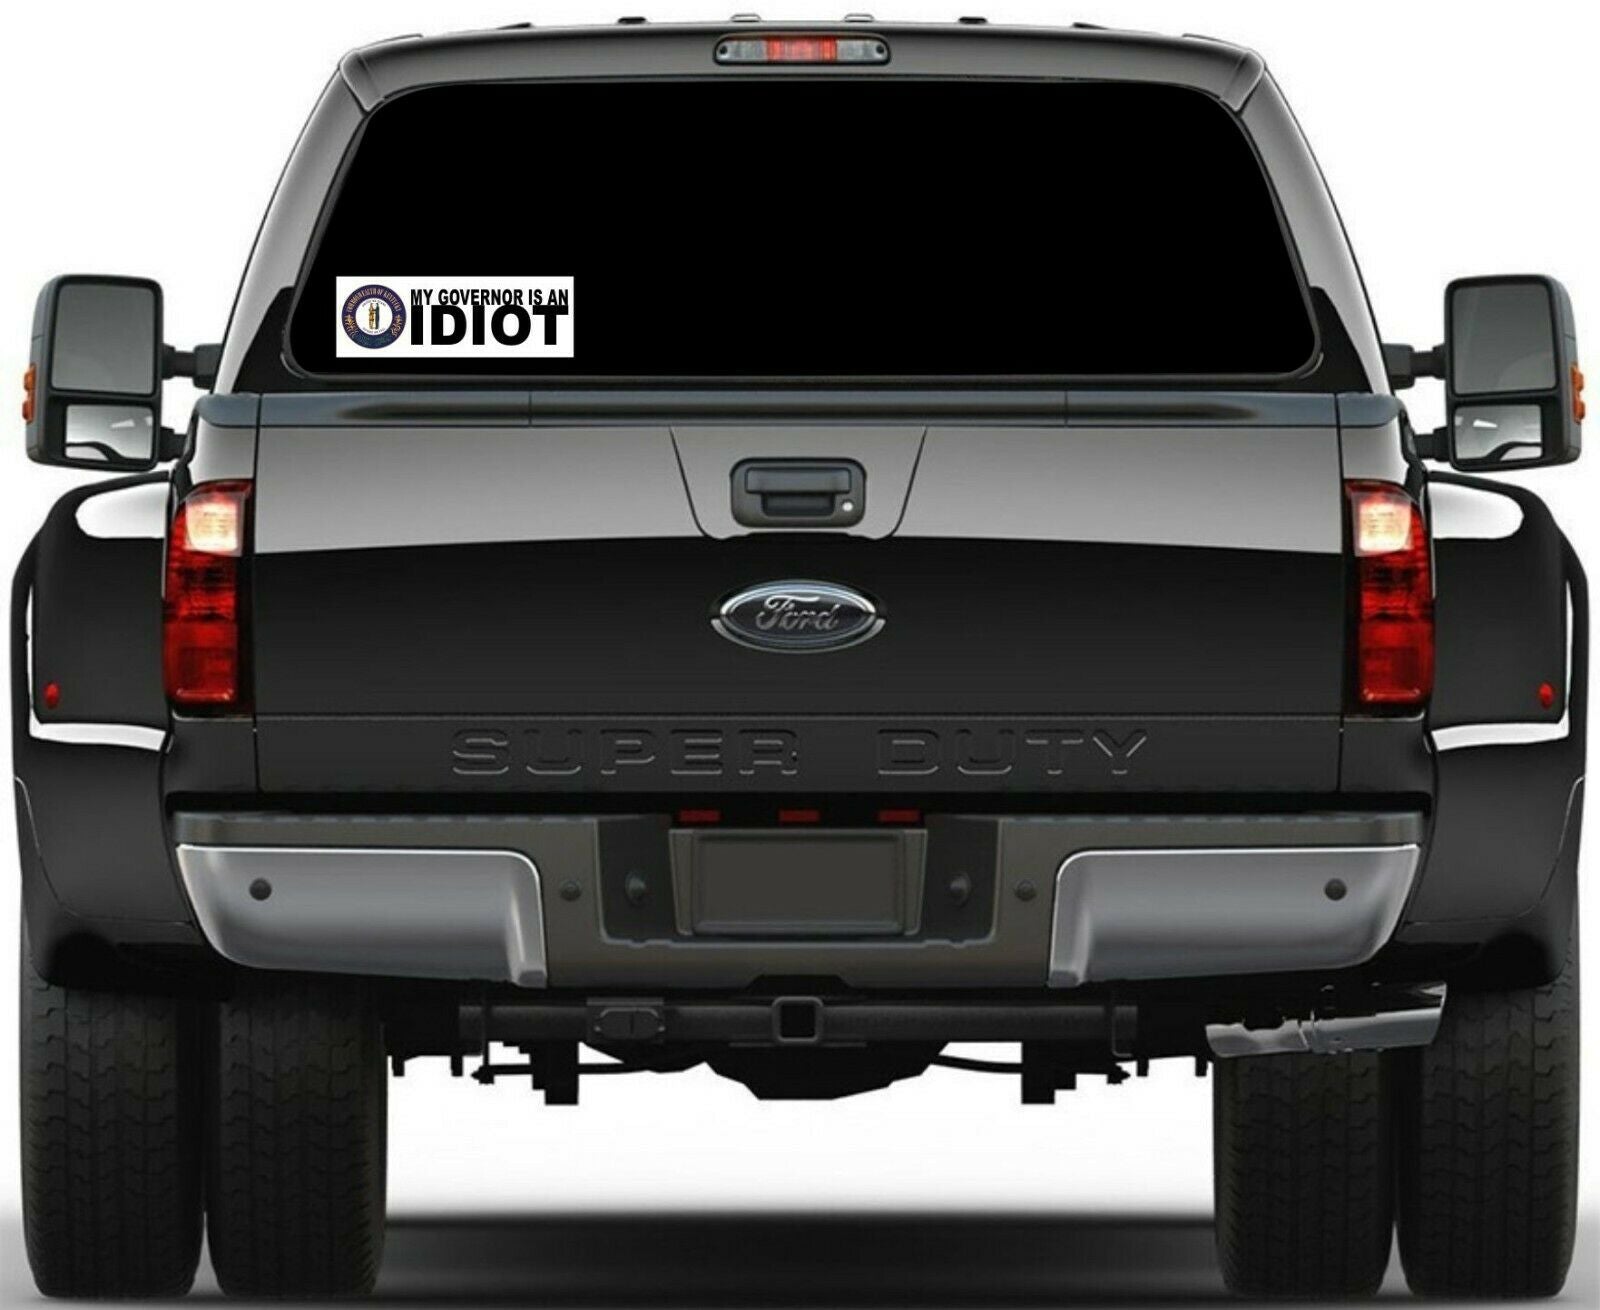 My governor is an idiot bumper sticker - State of Kentucky Version - 8.7" x 3" - Powercall Sirens LLC